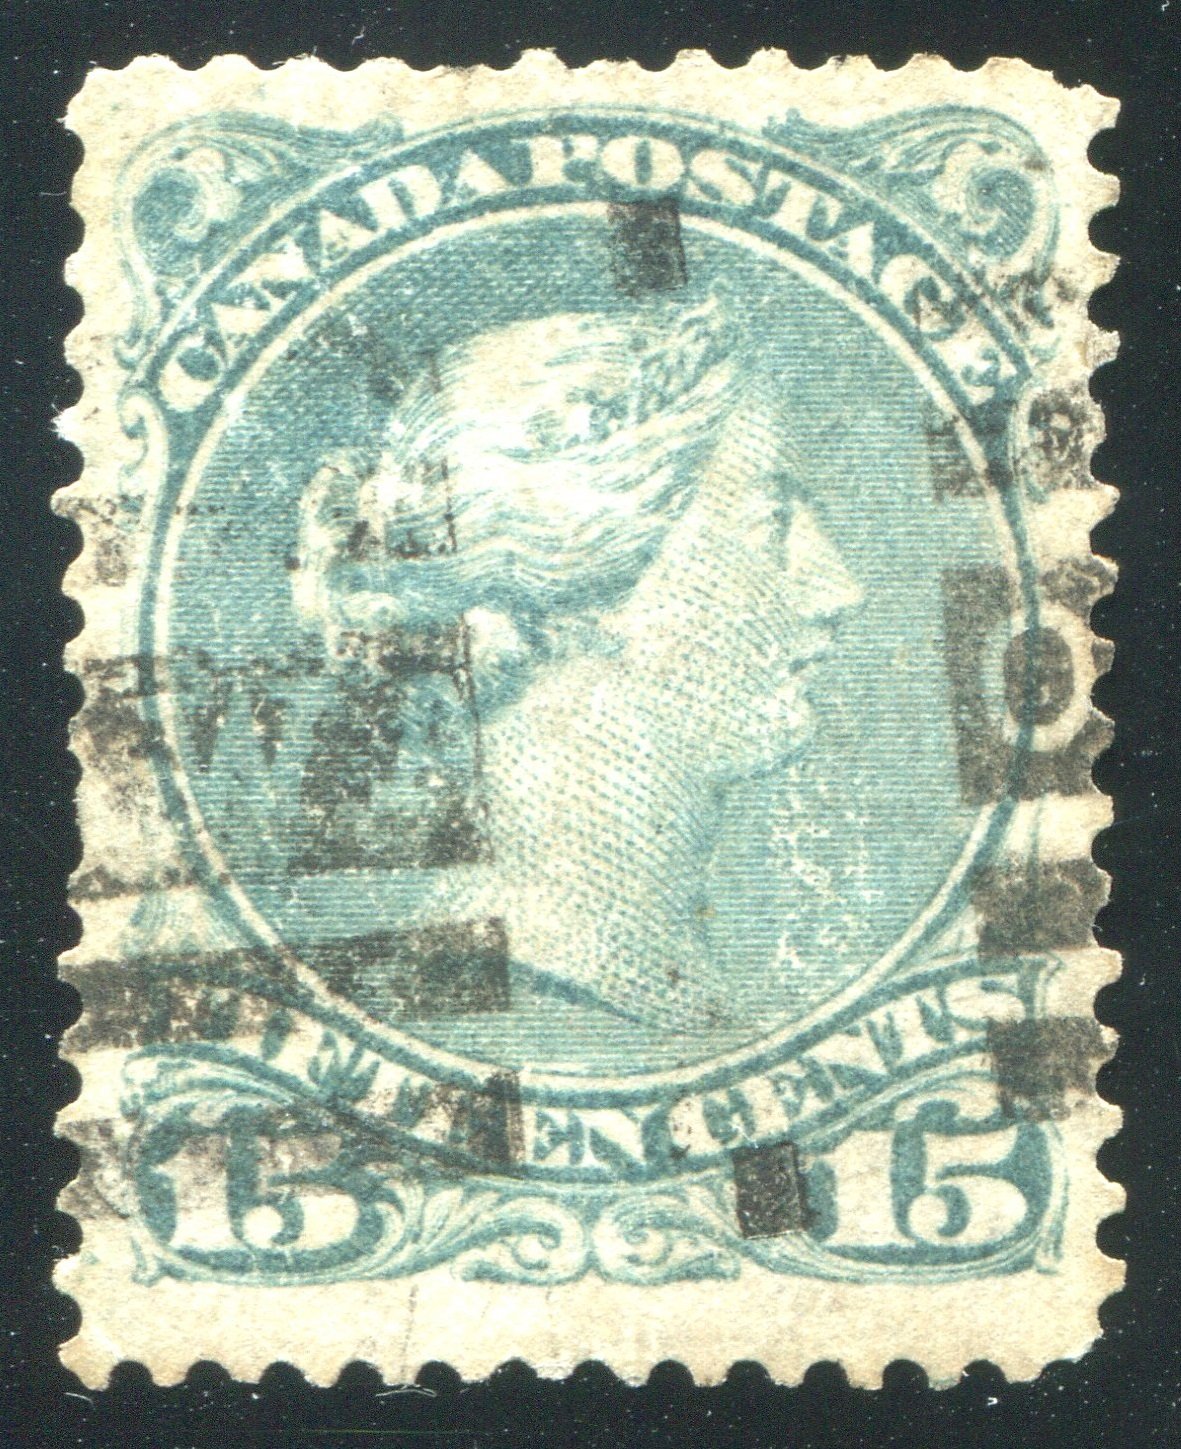 0030CA1708 - Canada #30b - Used Major Re-Entry